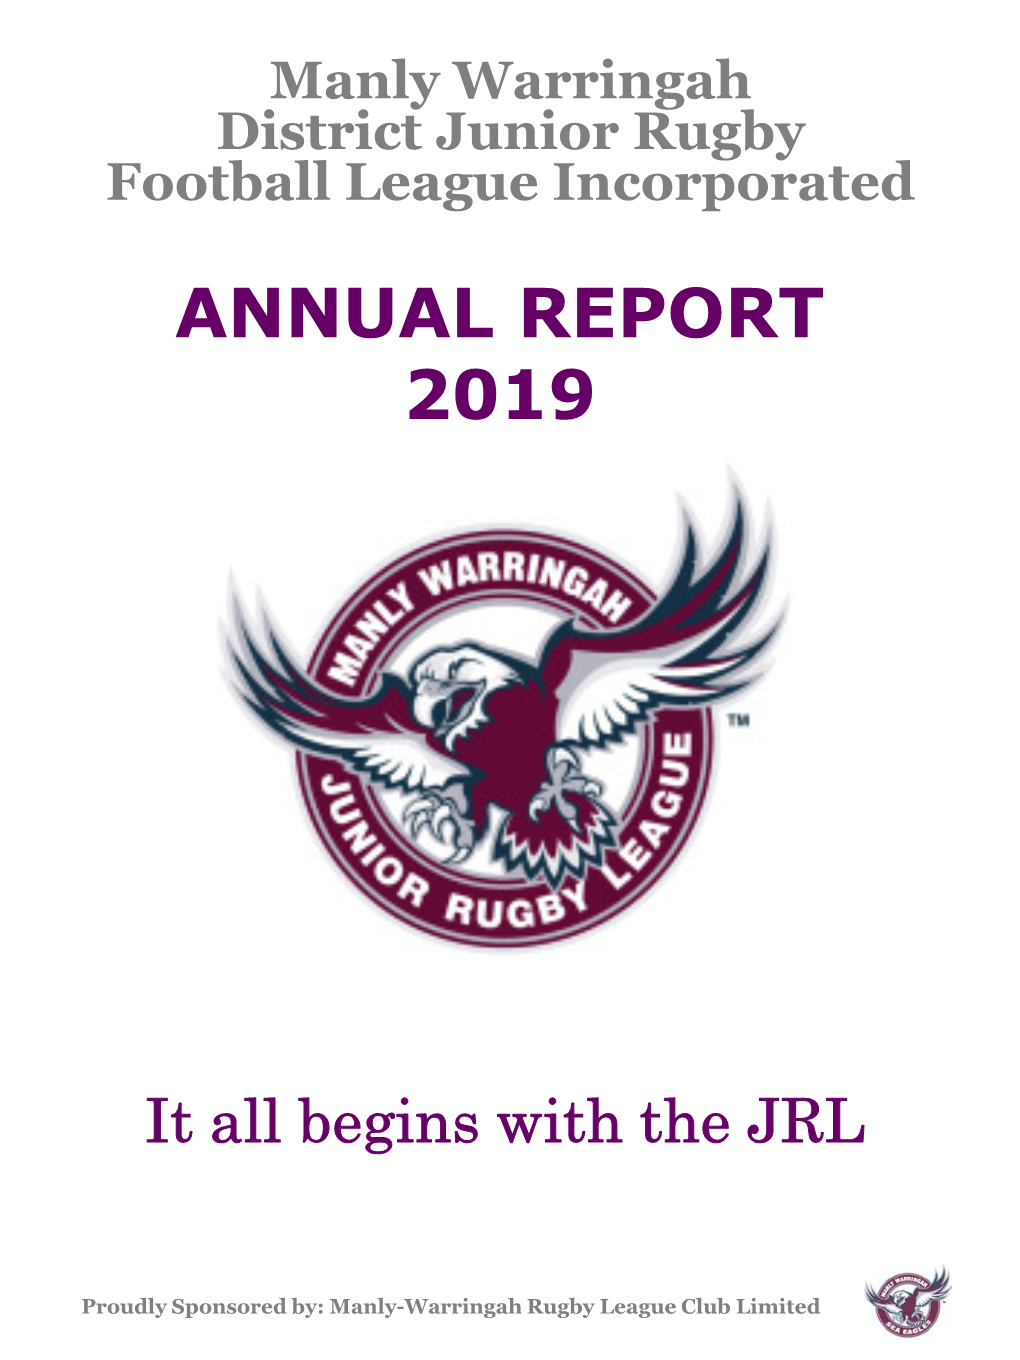 2019 Annual Report Page 2